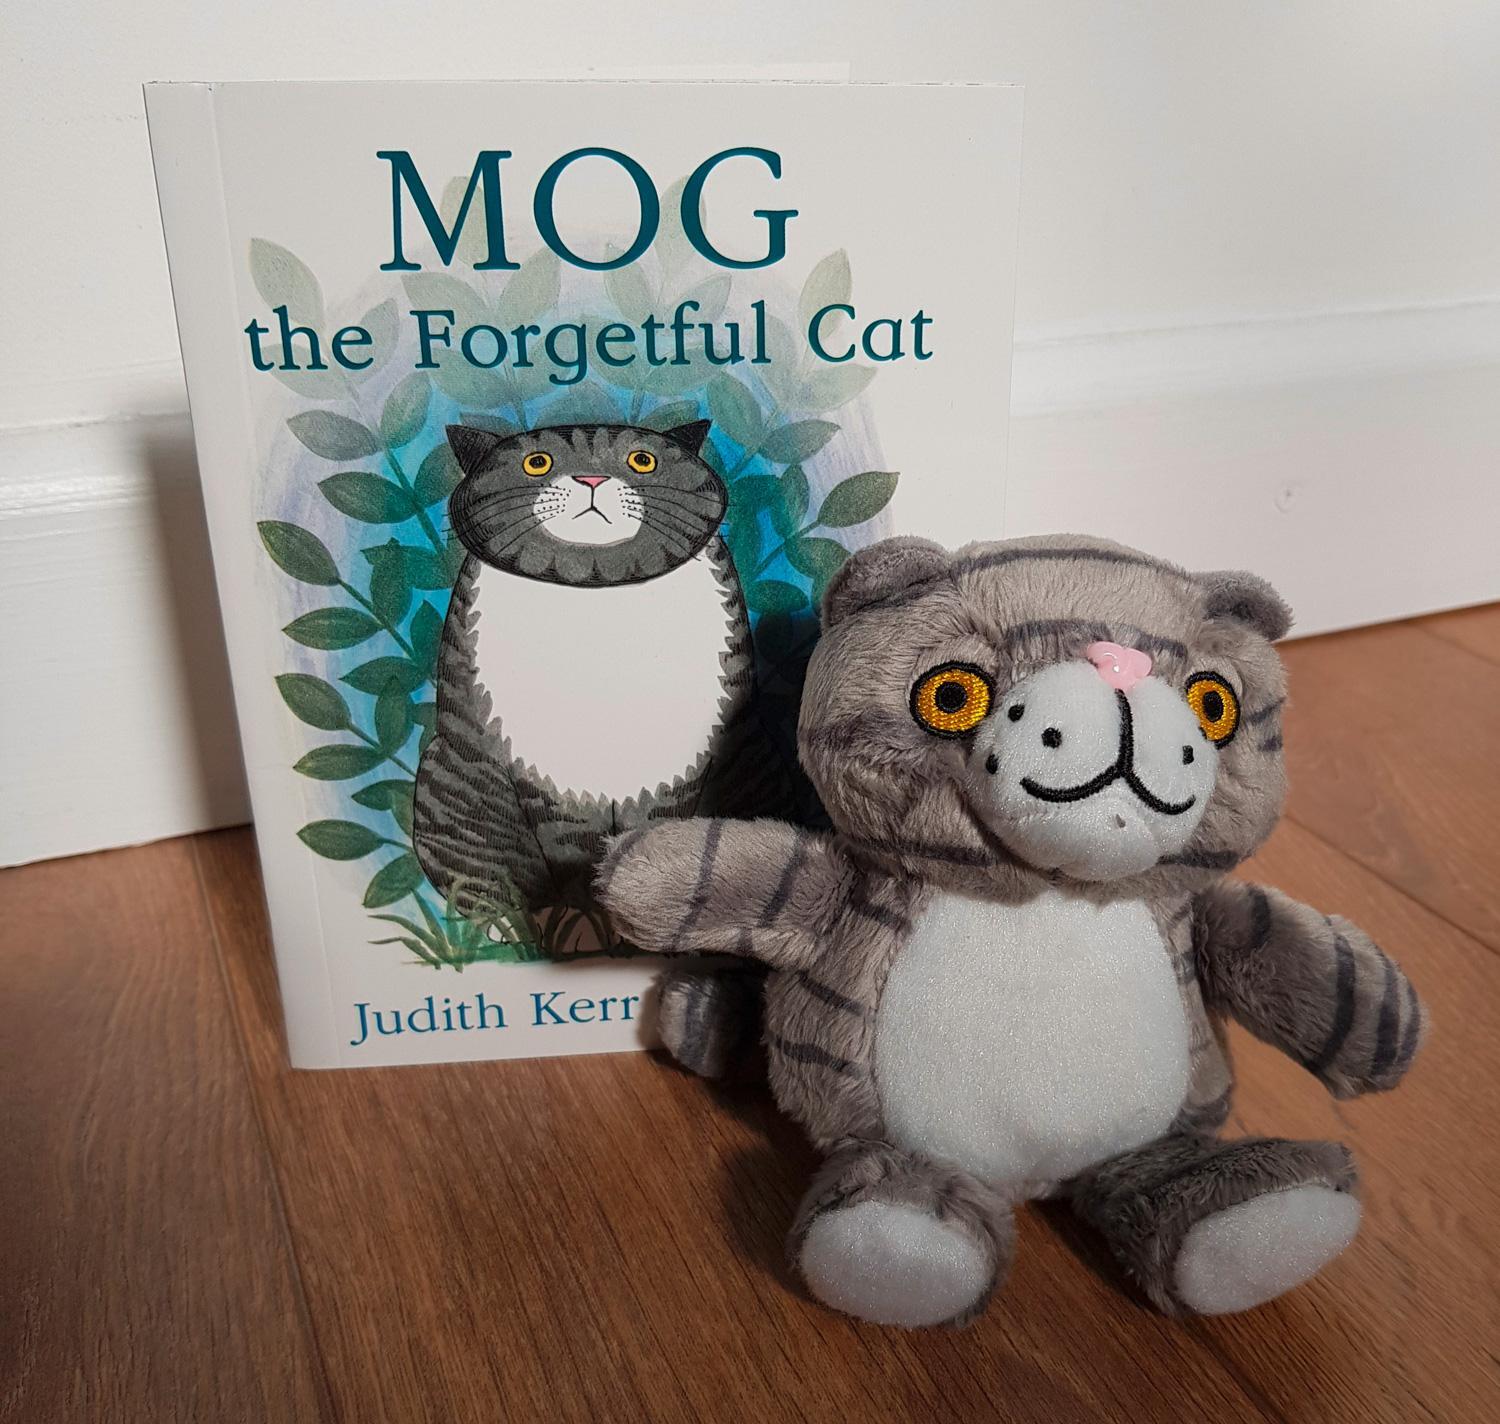 Bild: 9780008262143 | Mog the Forgetful Cat Book and Toy Gift Set | Judith Kerr | Box | 2017